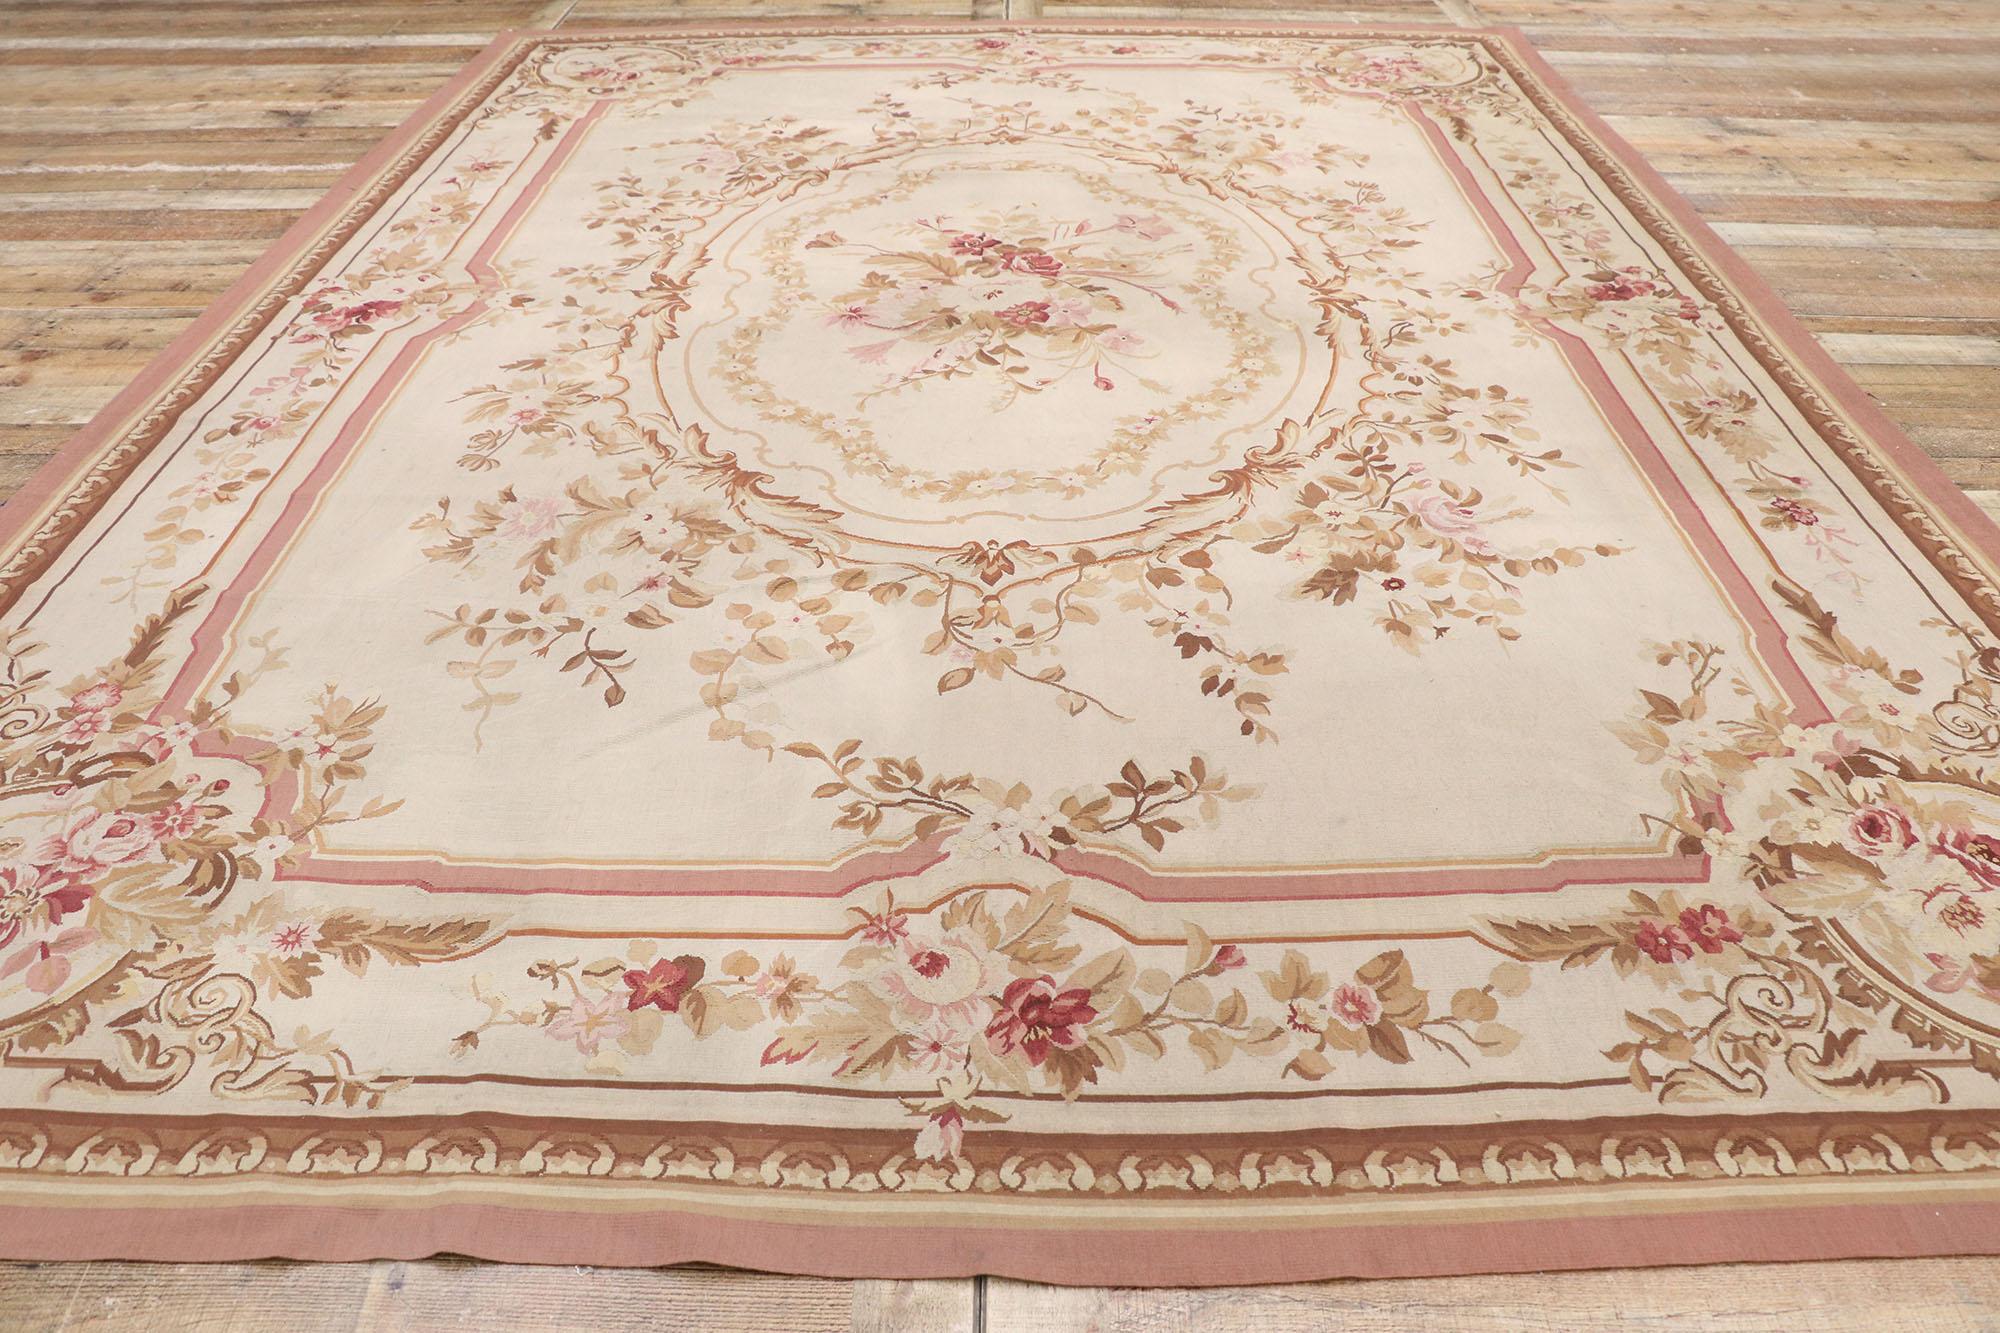 Vintage French Aubusson Rug with Romantic Rococo Style In Good Condition For Sale In Dallas, TX